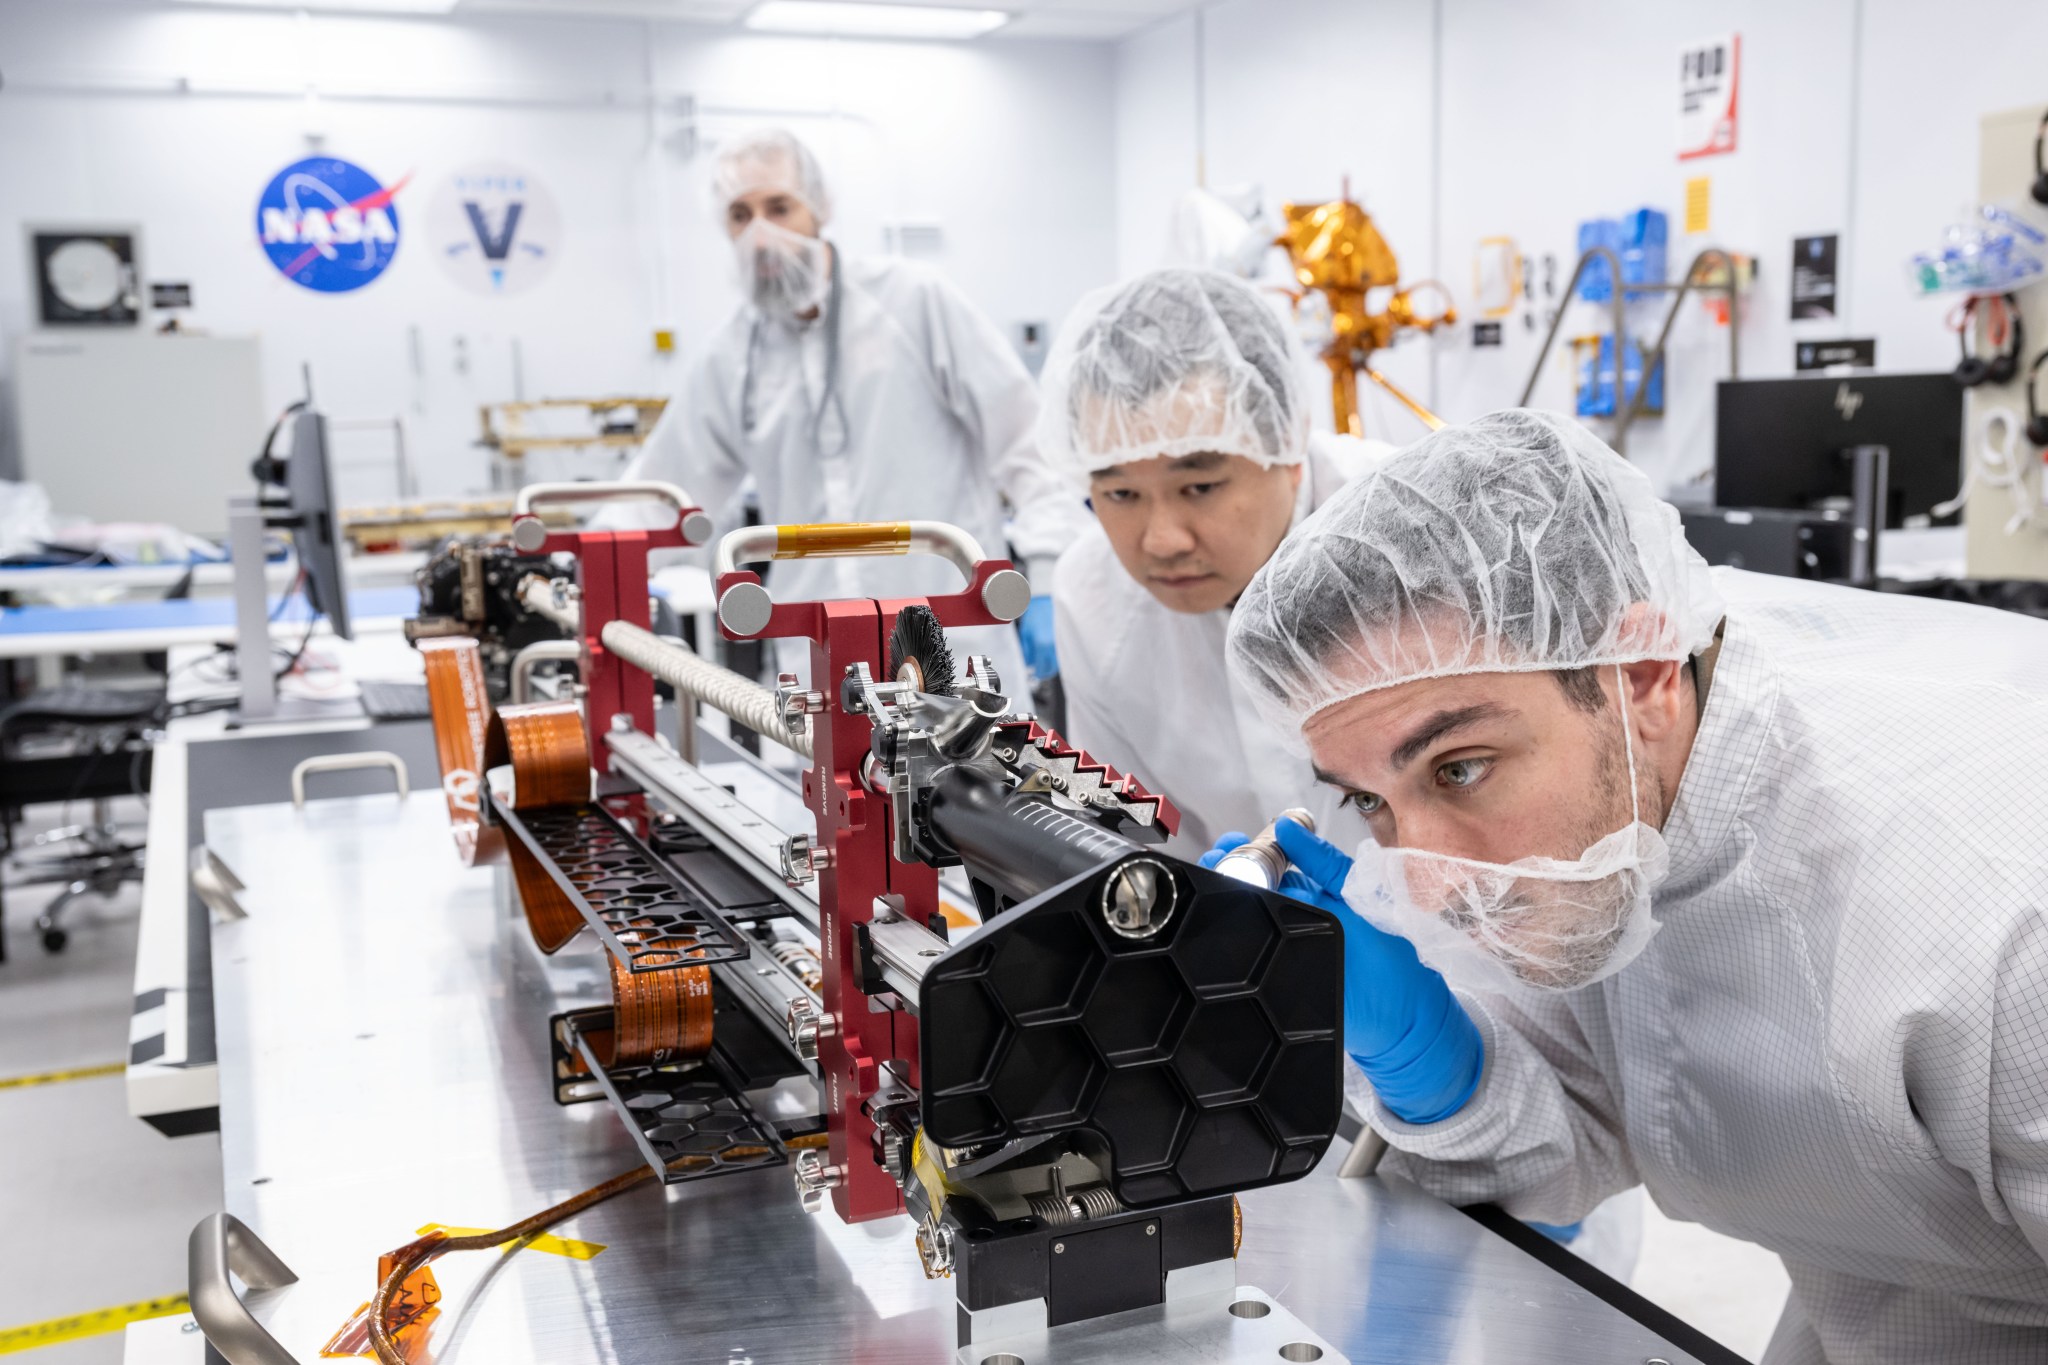 Engineers inspect the TRIDENT drill in a clean room.